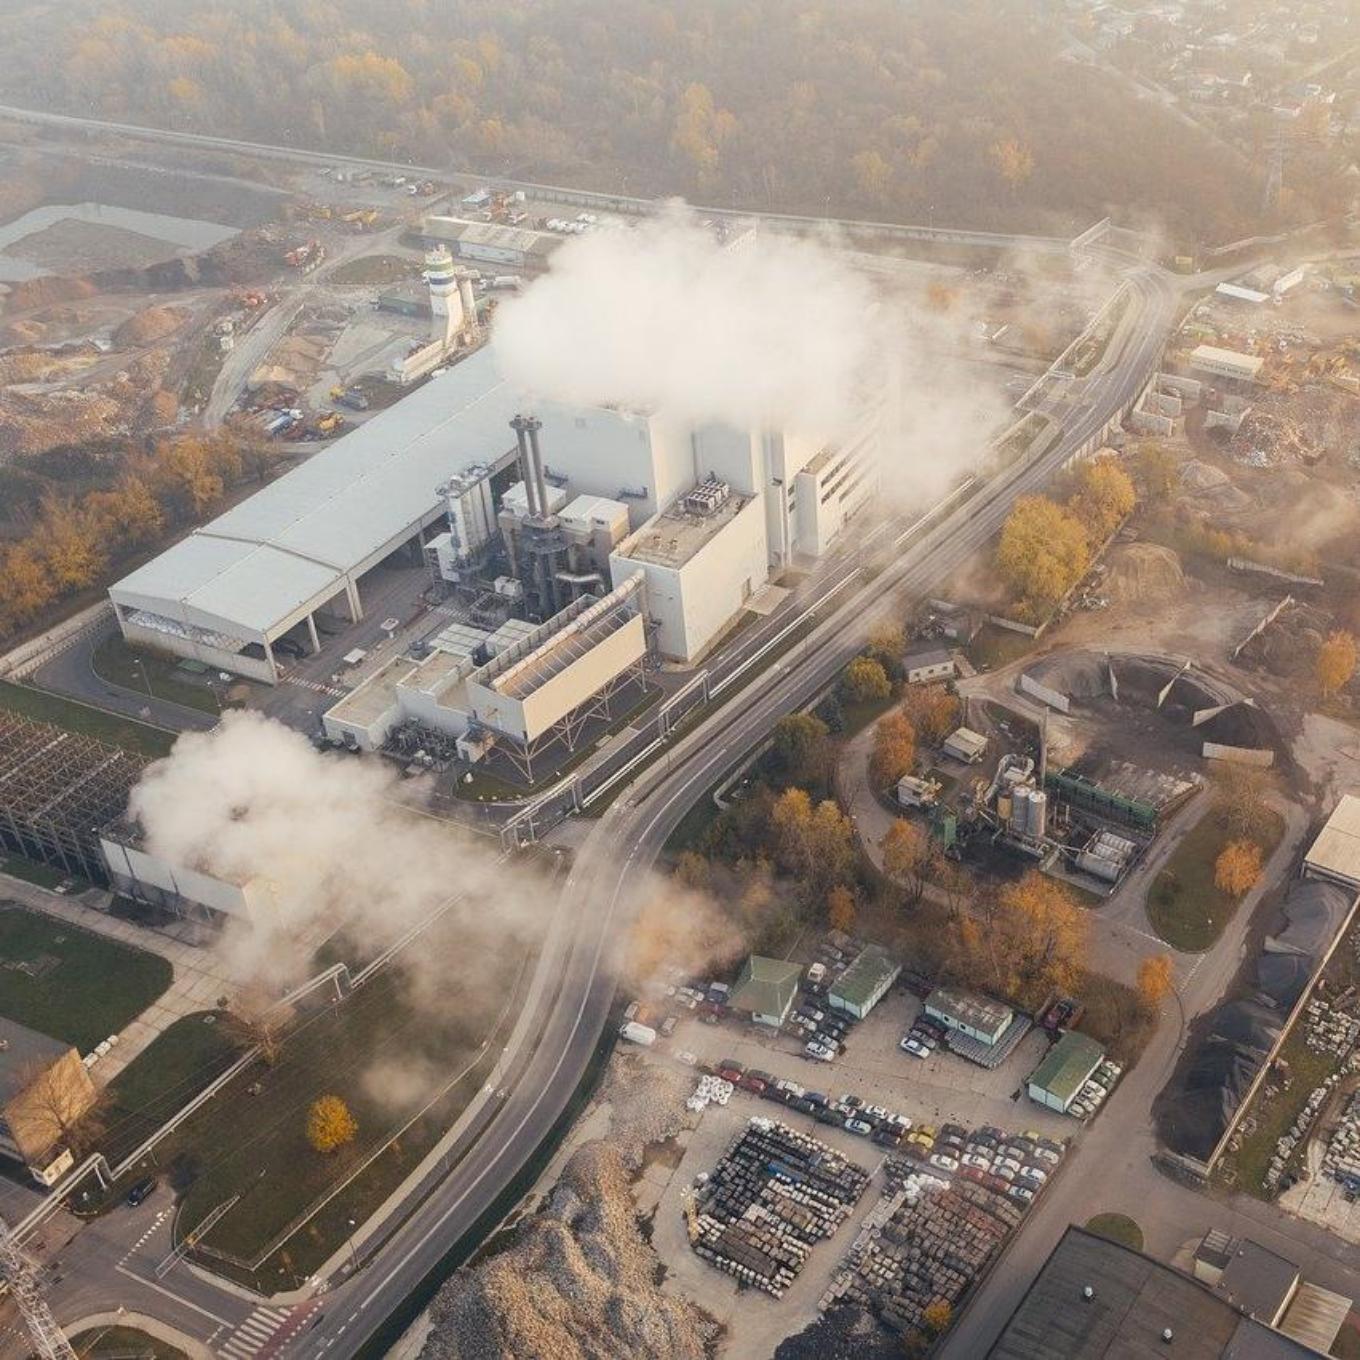 Ariel view of a factory producing smoke into the environment